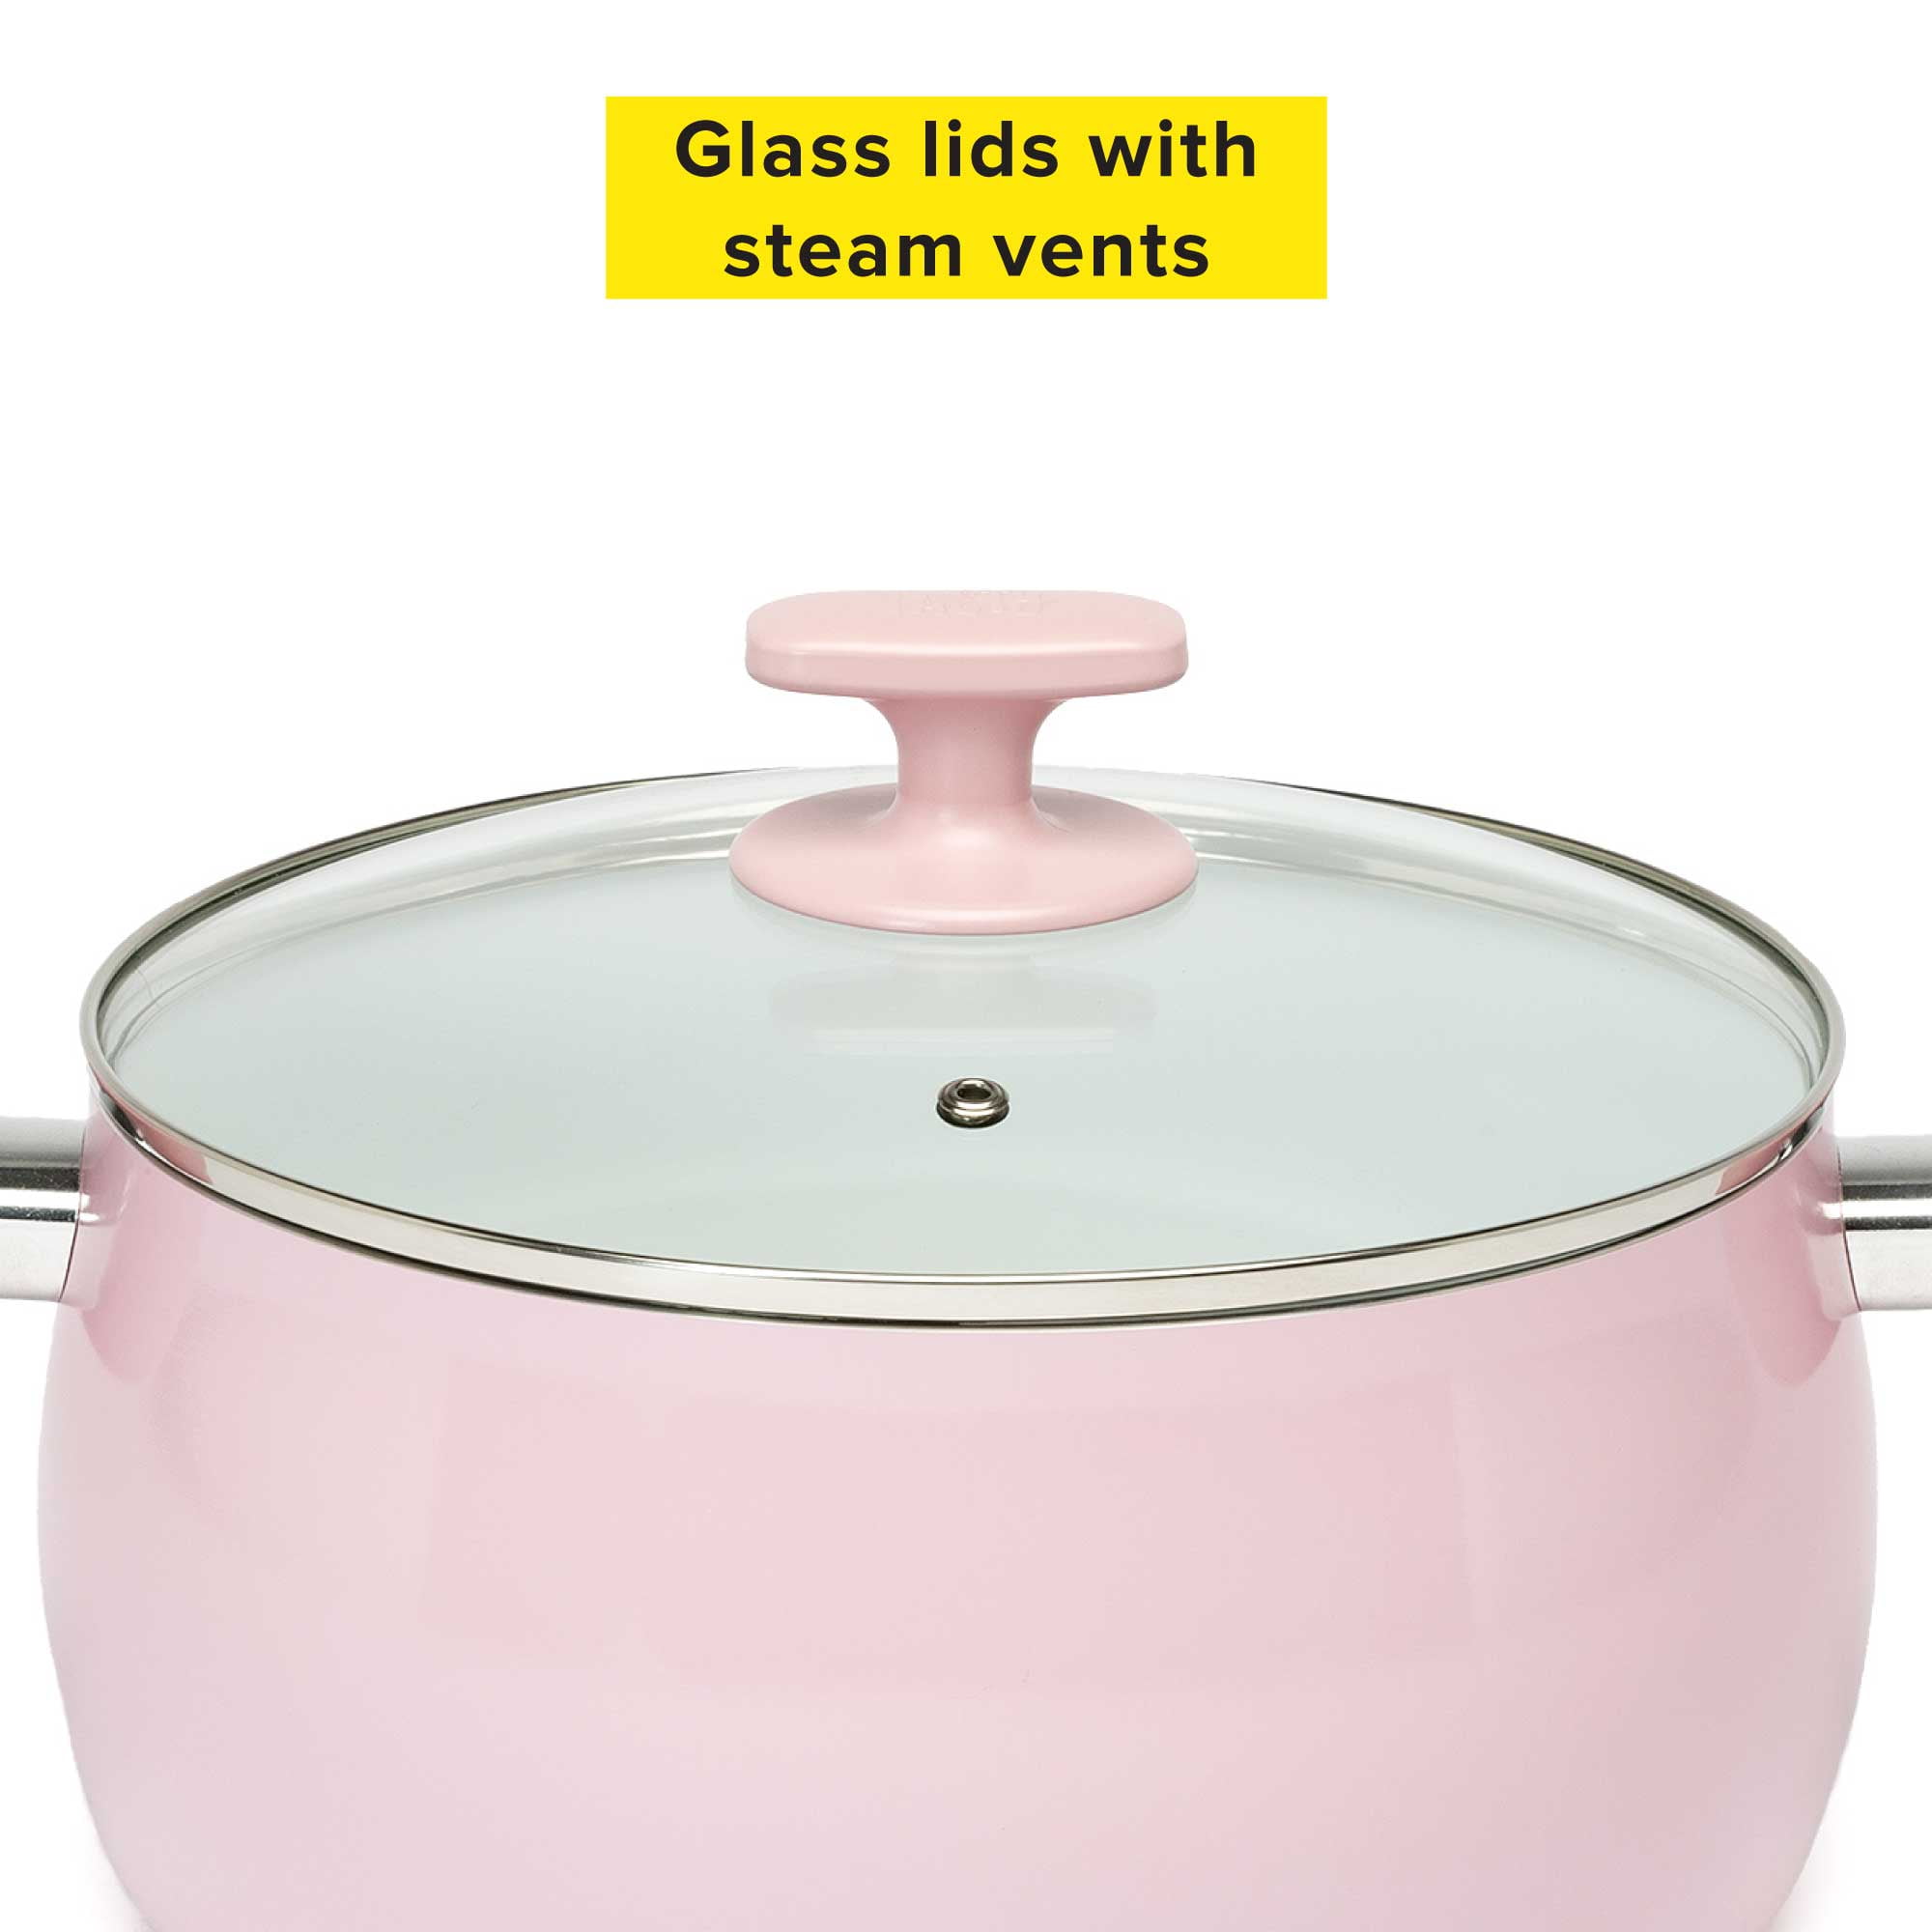 Tasty - Meet the ALL NEW absolutely beautiful pink tasty cookware